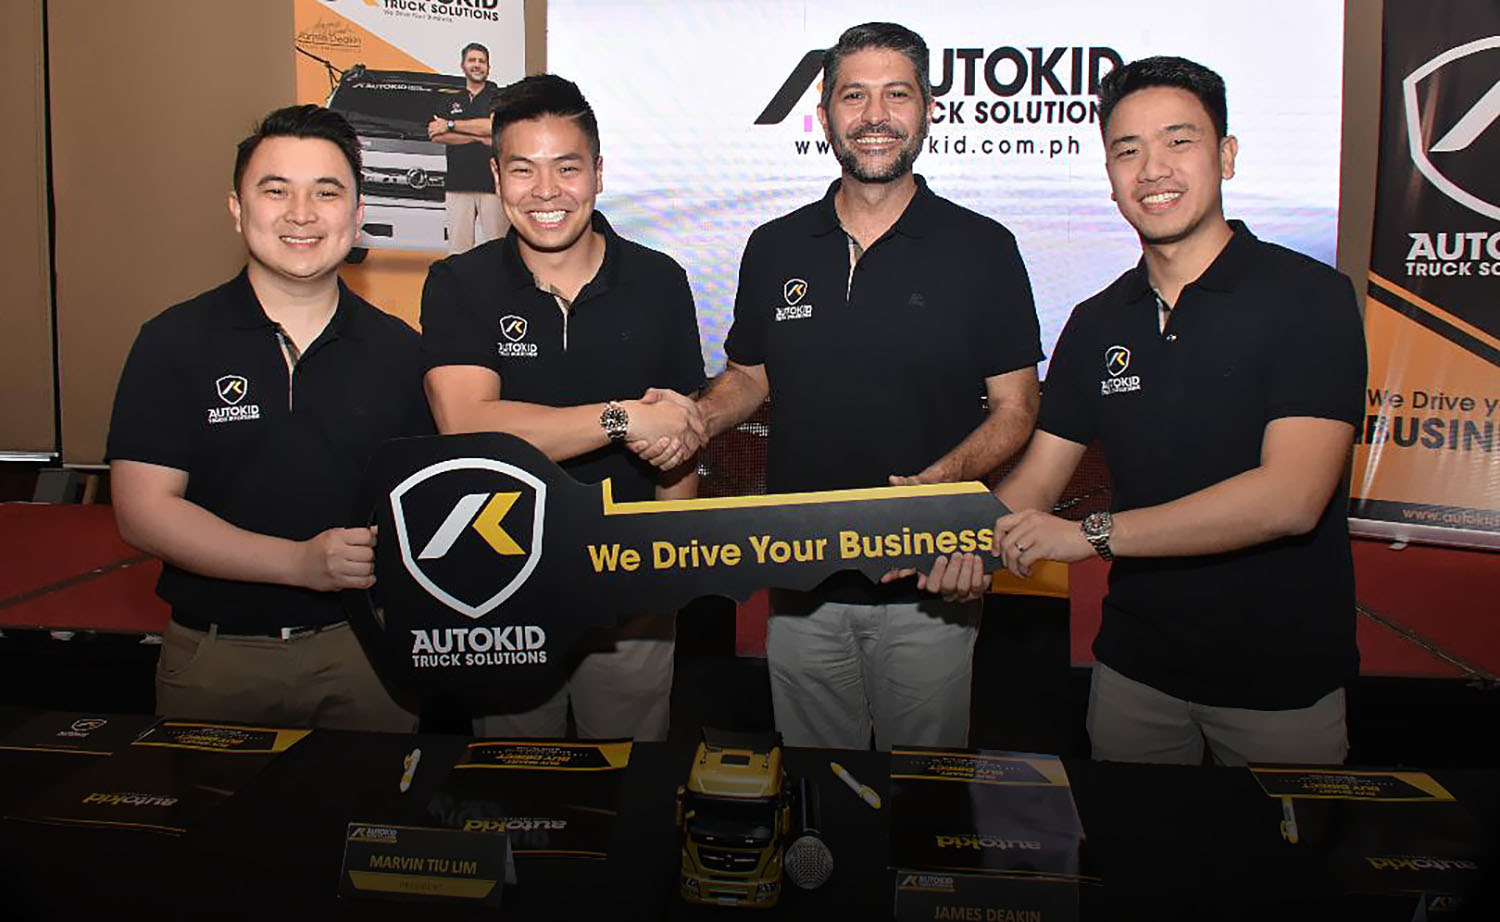 October 2021 is a special date for Autokid as it is at this month that it will celebrate 10 years of driving your business. 